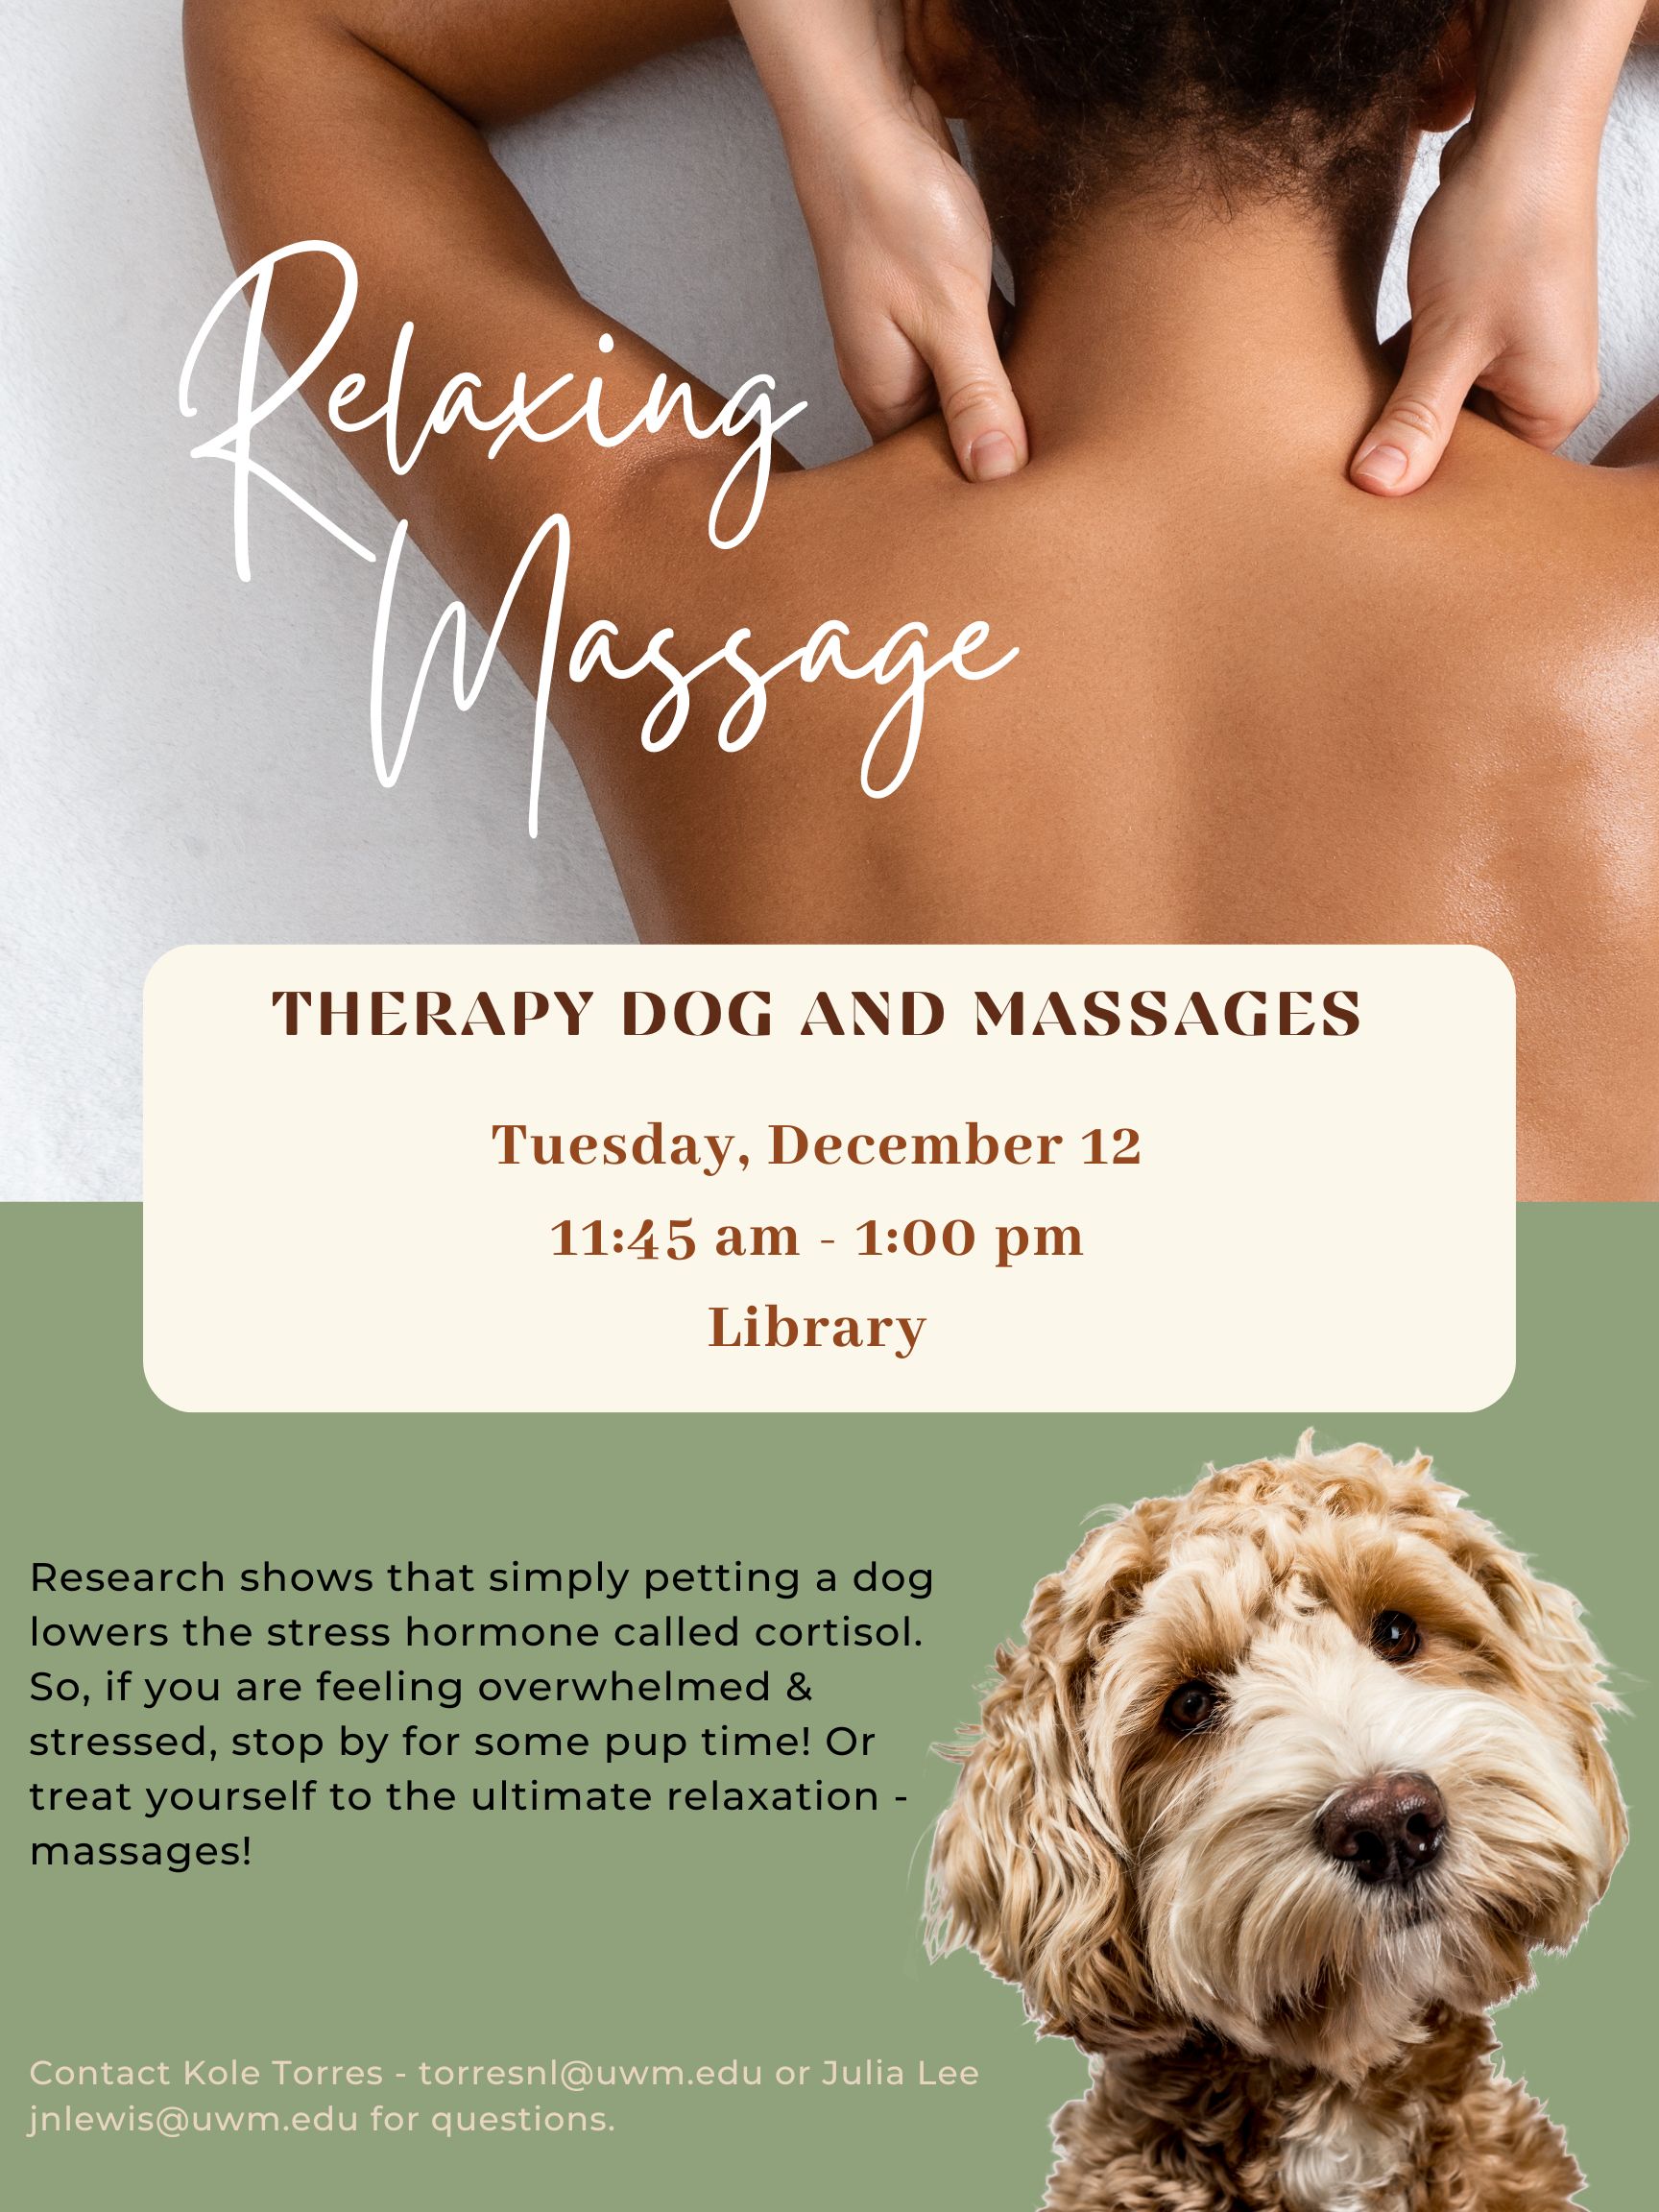 Therapy Dog and Massages